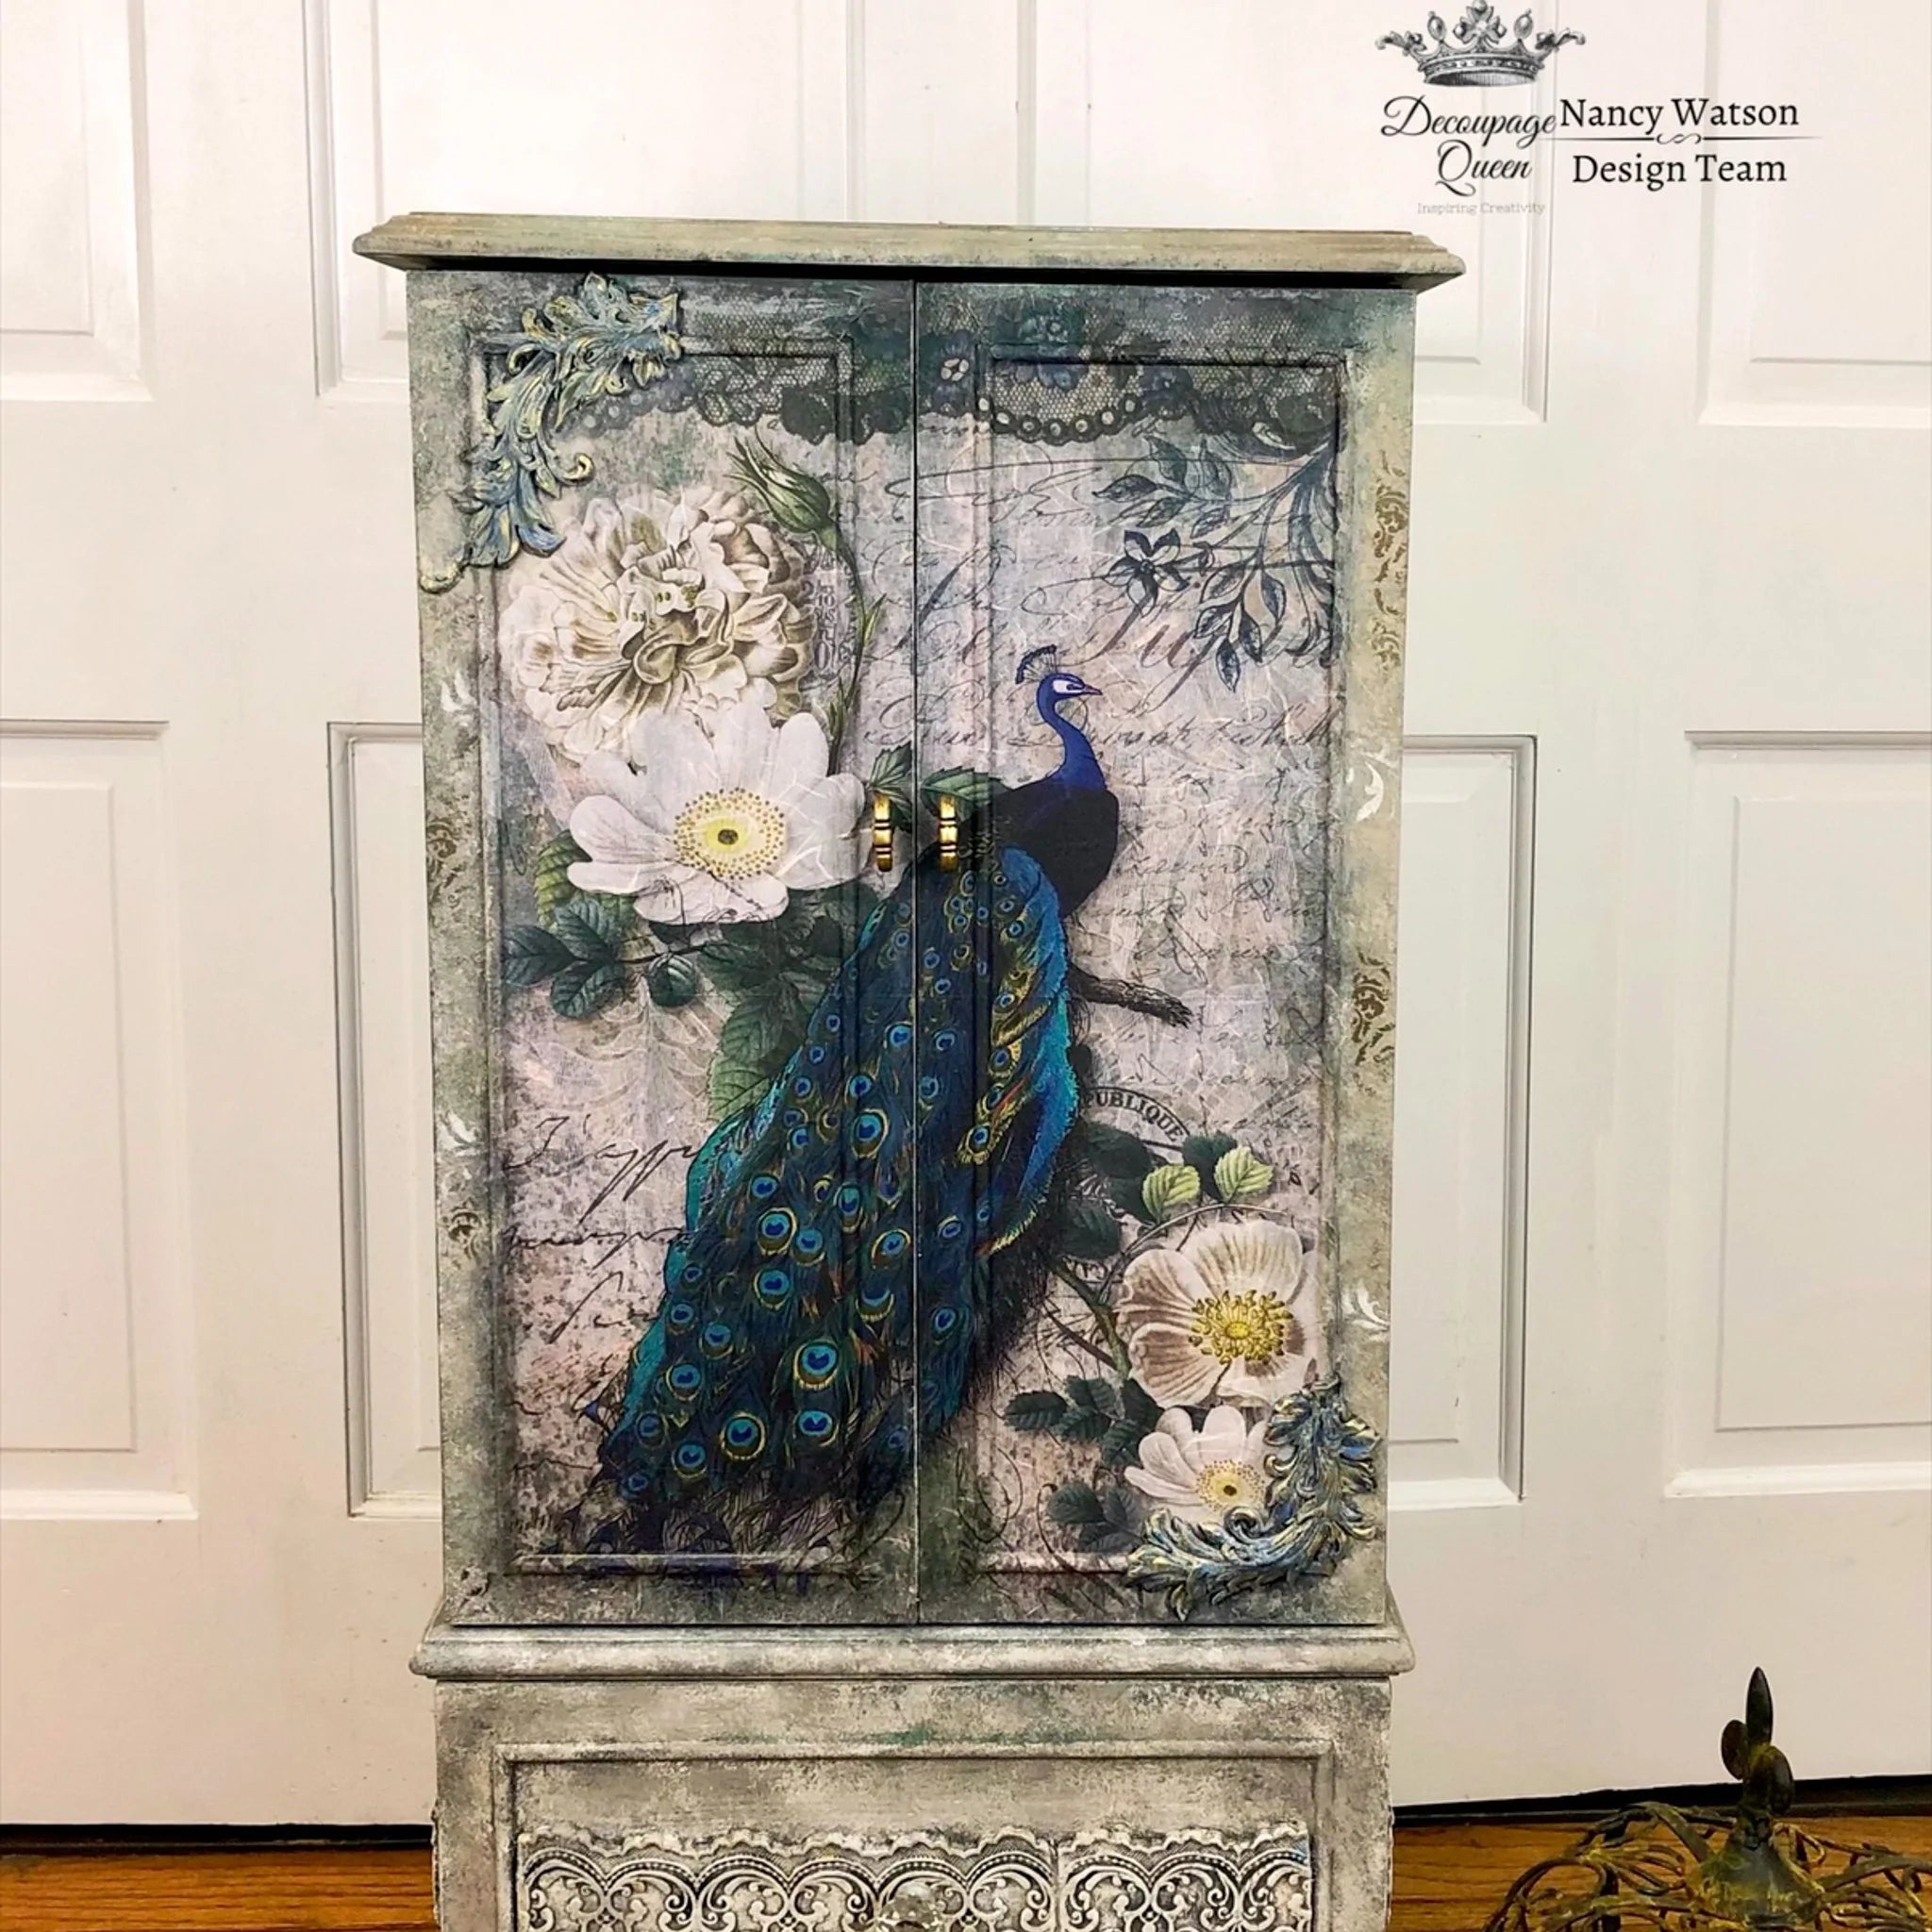 Rustic dresser with the Peacock Majesty decoupage paper on top. A Decoupage Queen and Nancy Watson Design Team logo on the top right.